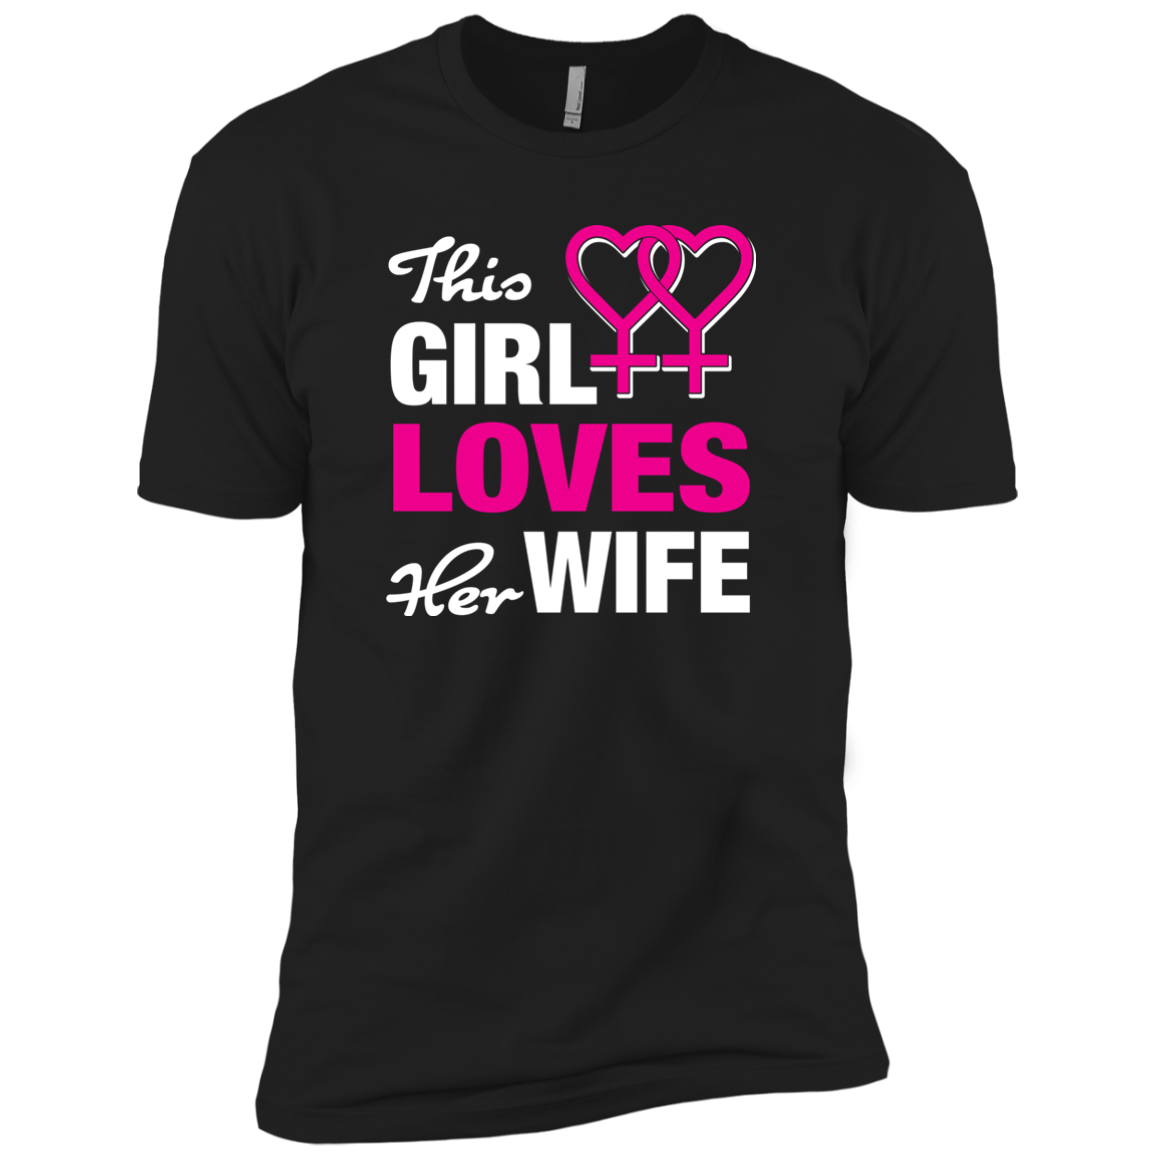 This Girl Loves Her Wife